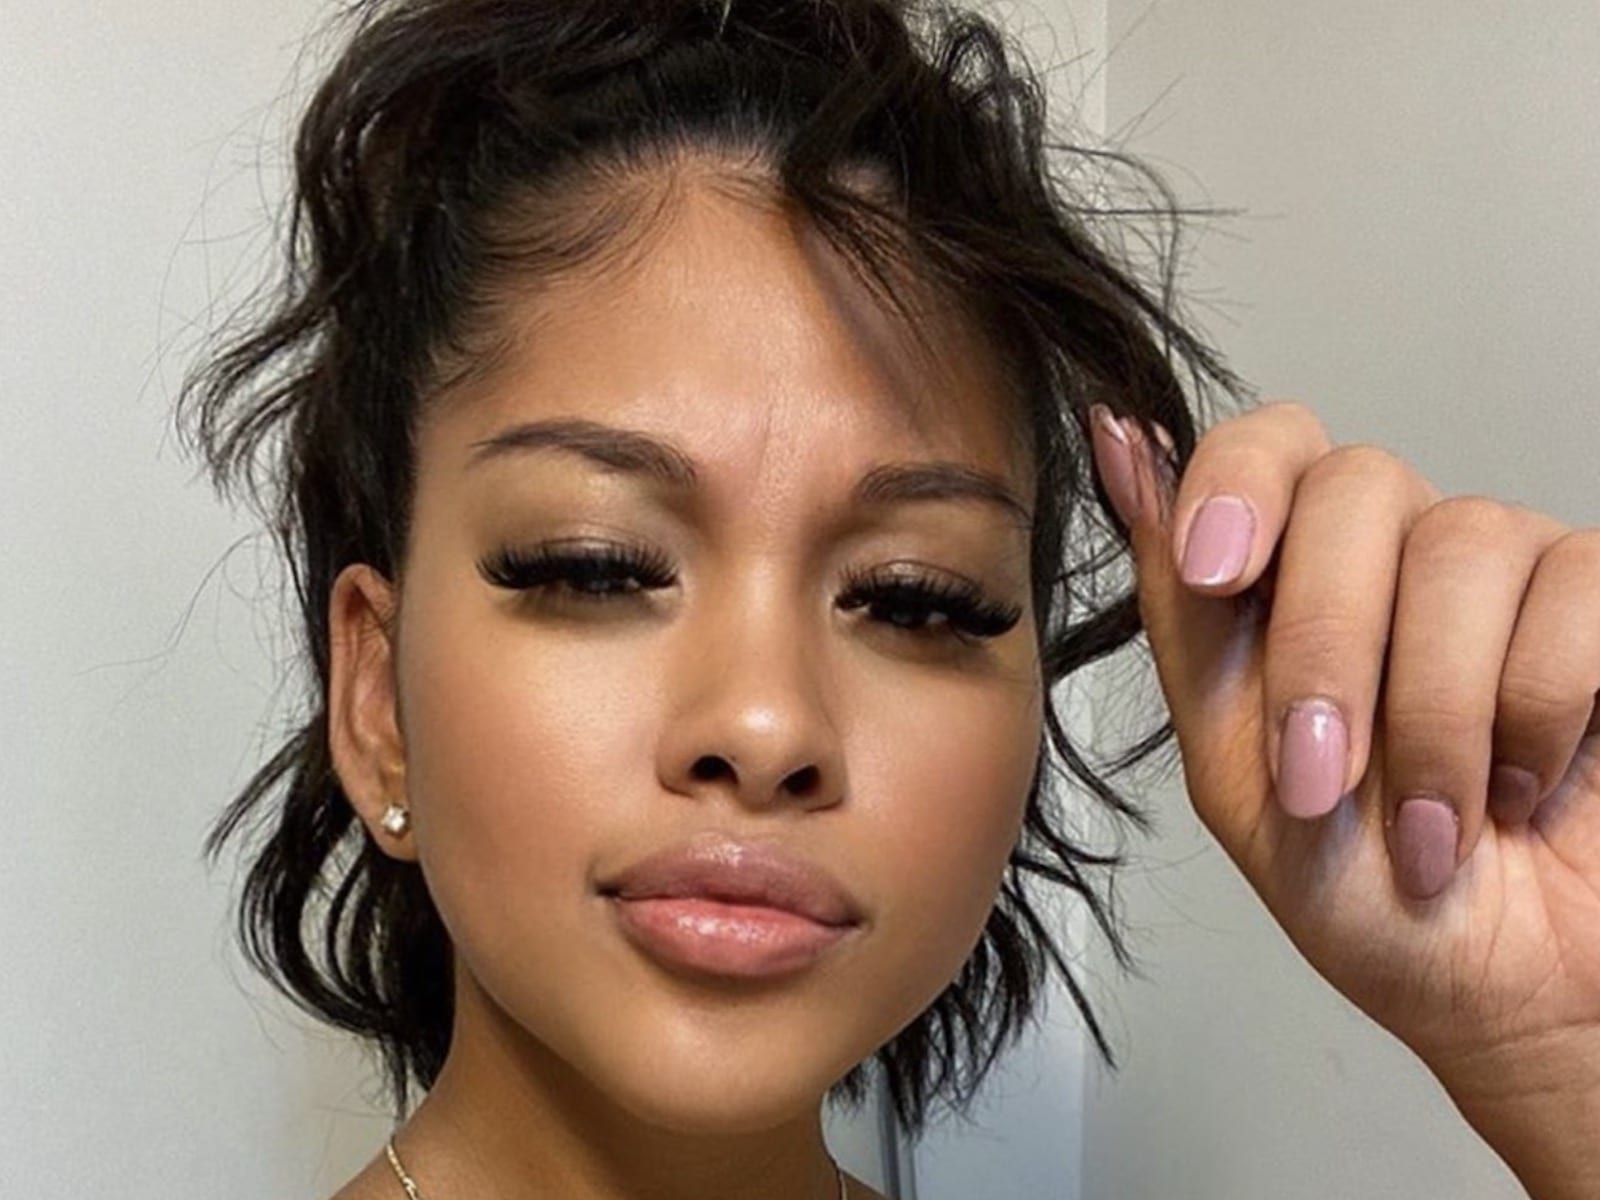 Ammika Harris' Latest Video Has Fans Praising Her Beauty - Check Out Her Post Here